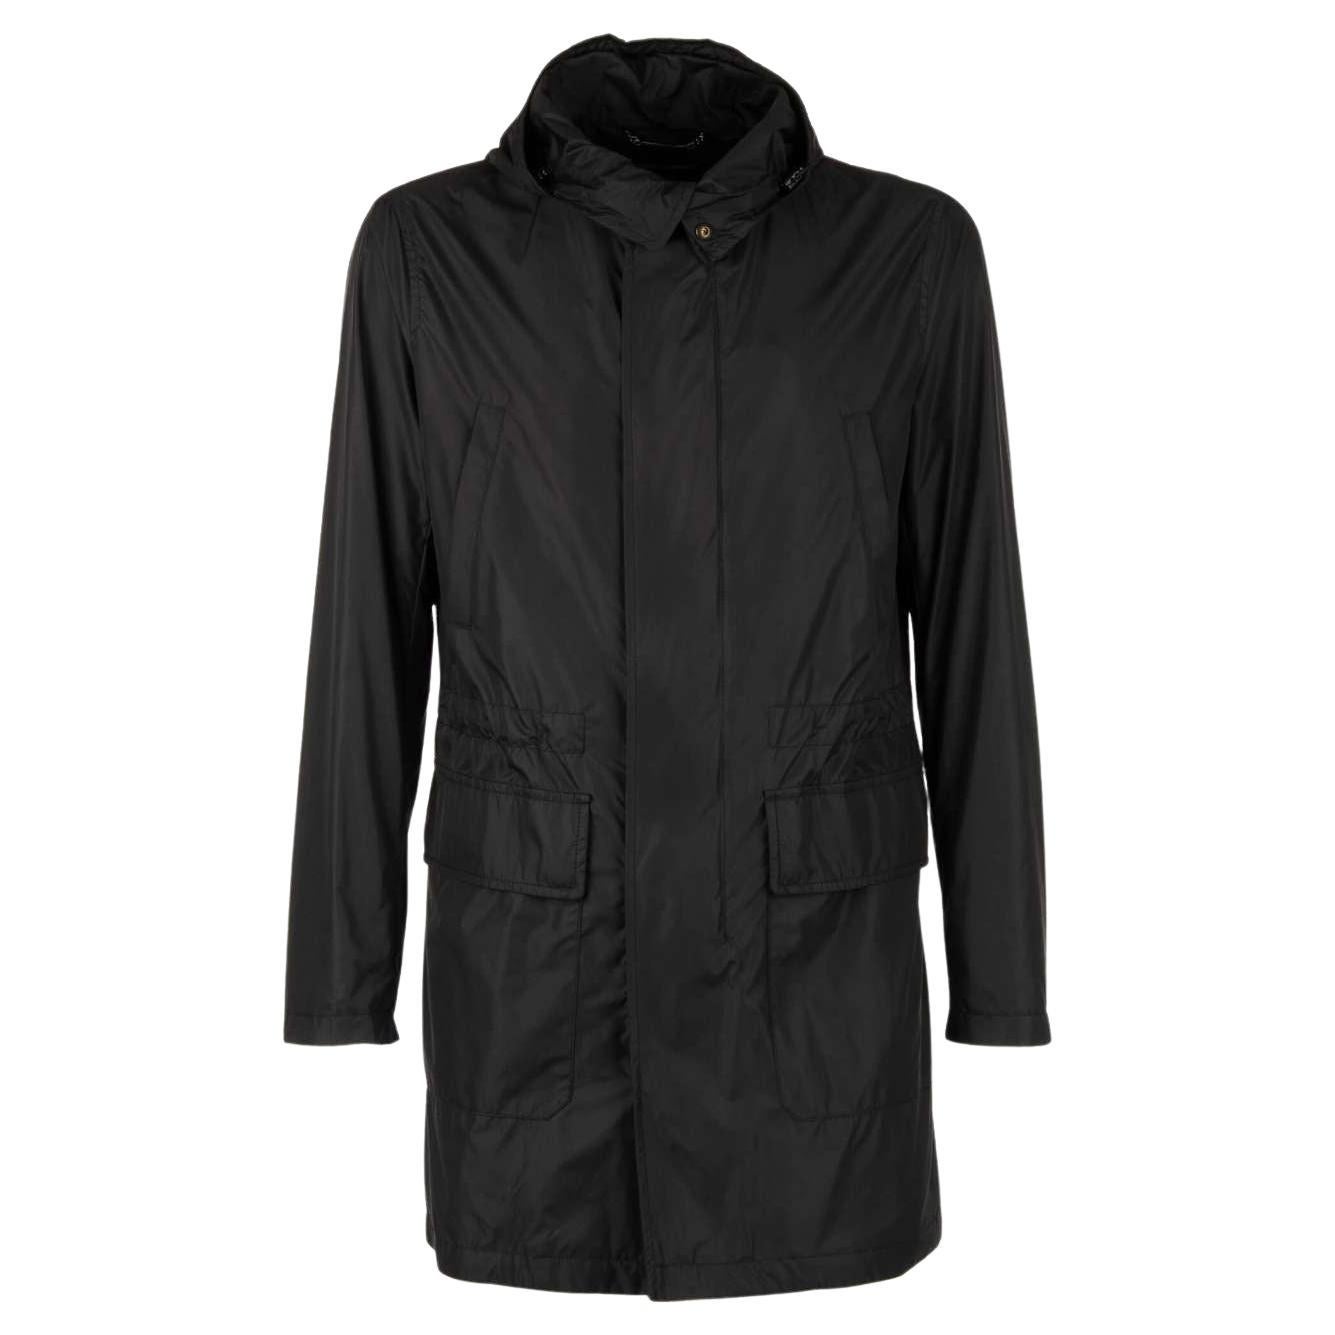 Dolce & Gabbana Classic Rain Parka Jacket with Pockets and Hoody Black 54 For Sale